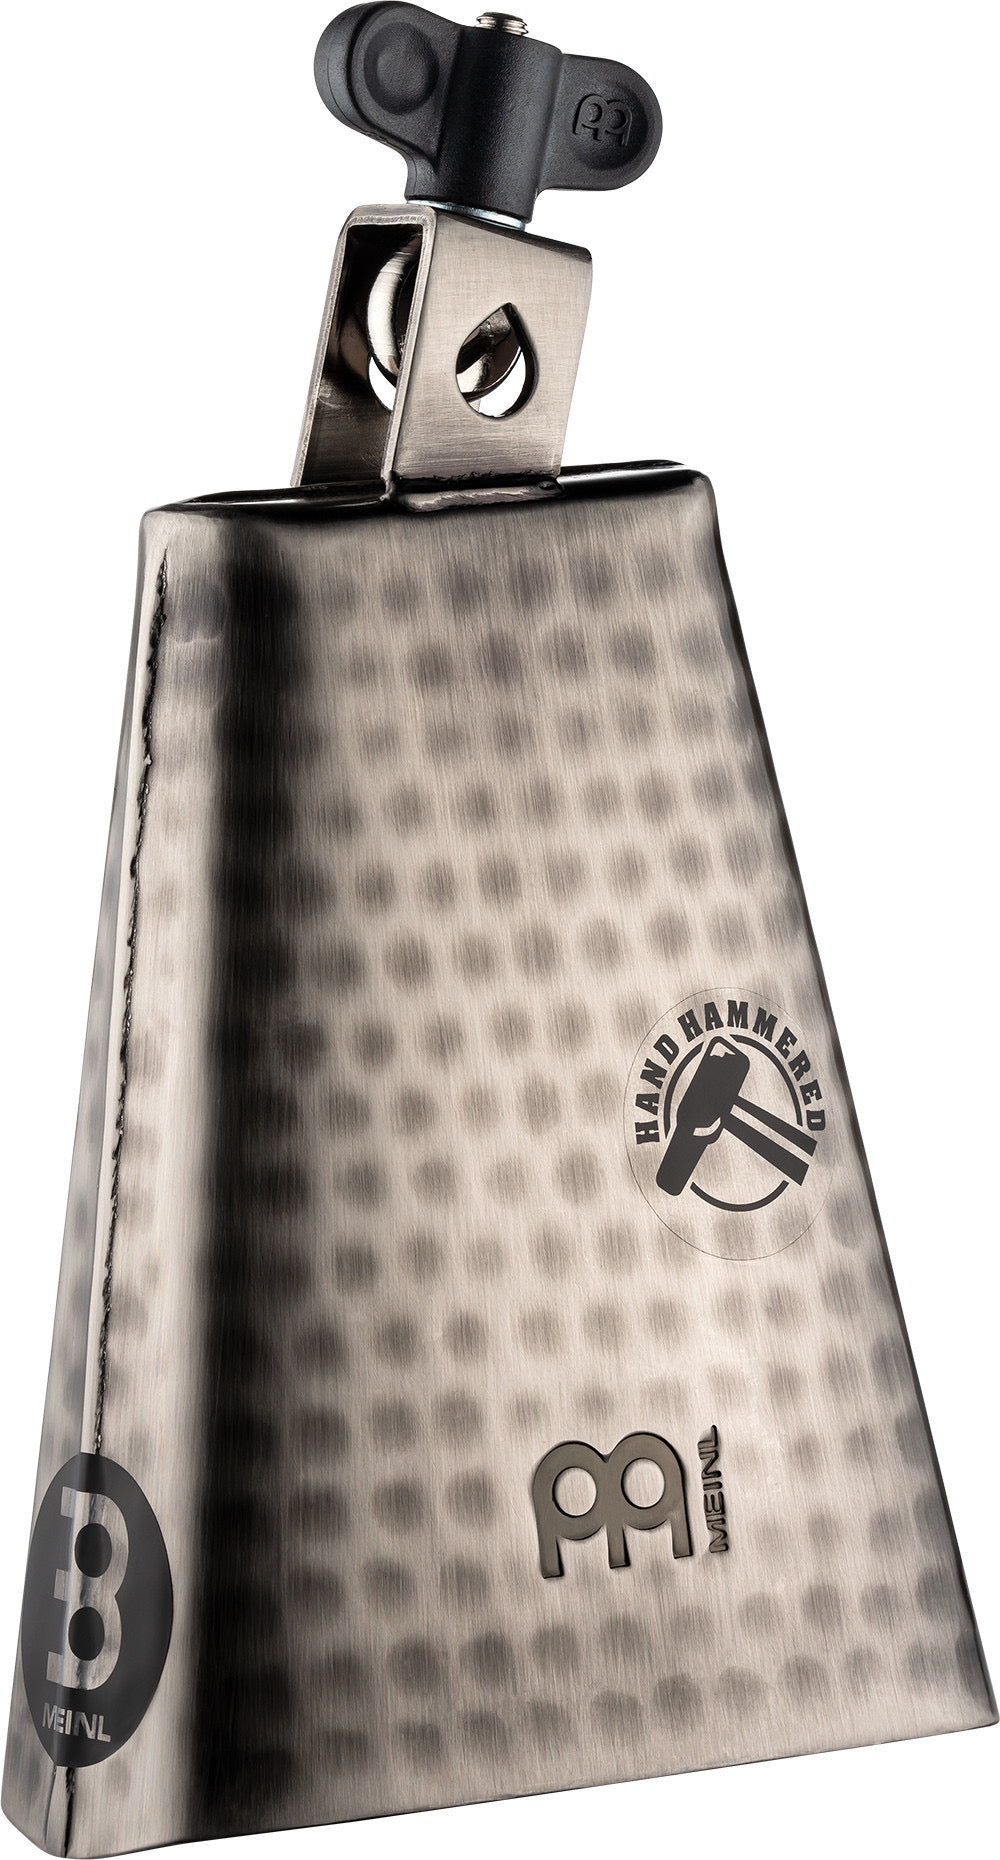 MEINL Percussion Hammered Series Medium Timbales Cowbell 6 1/4"-Silver (NEW)